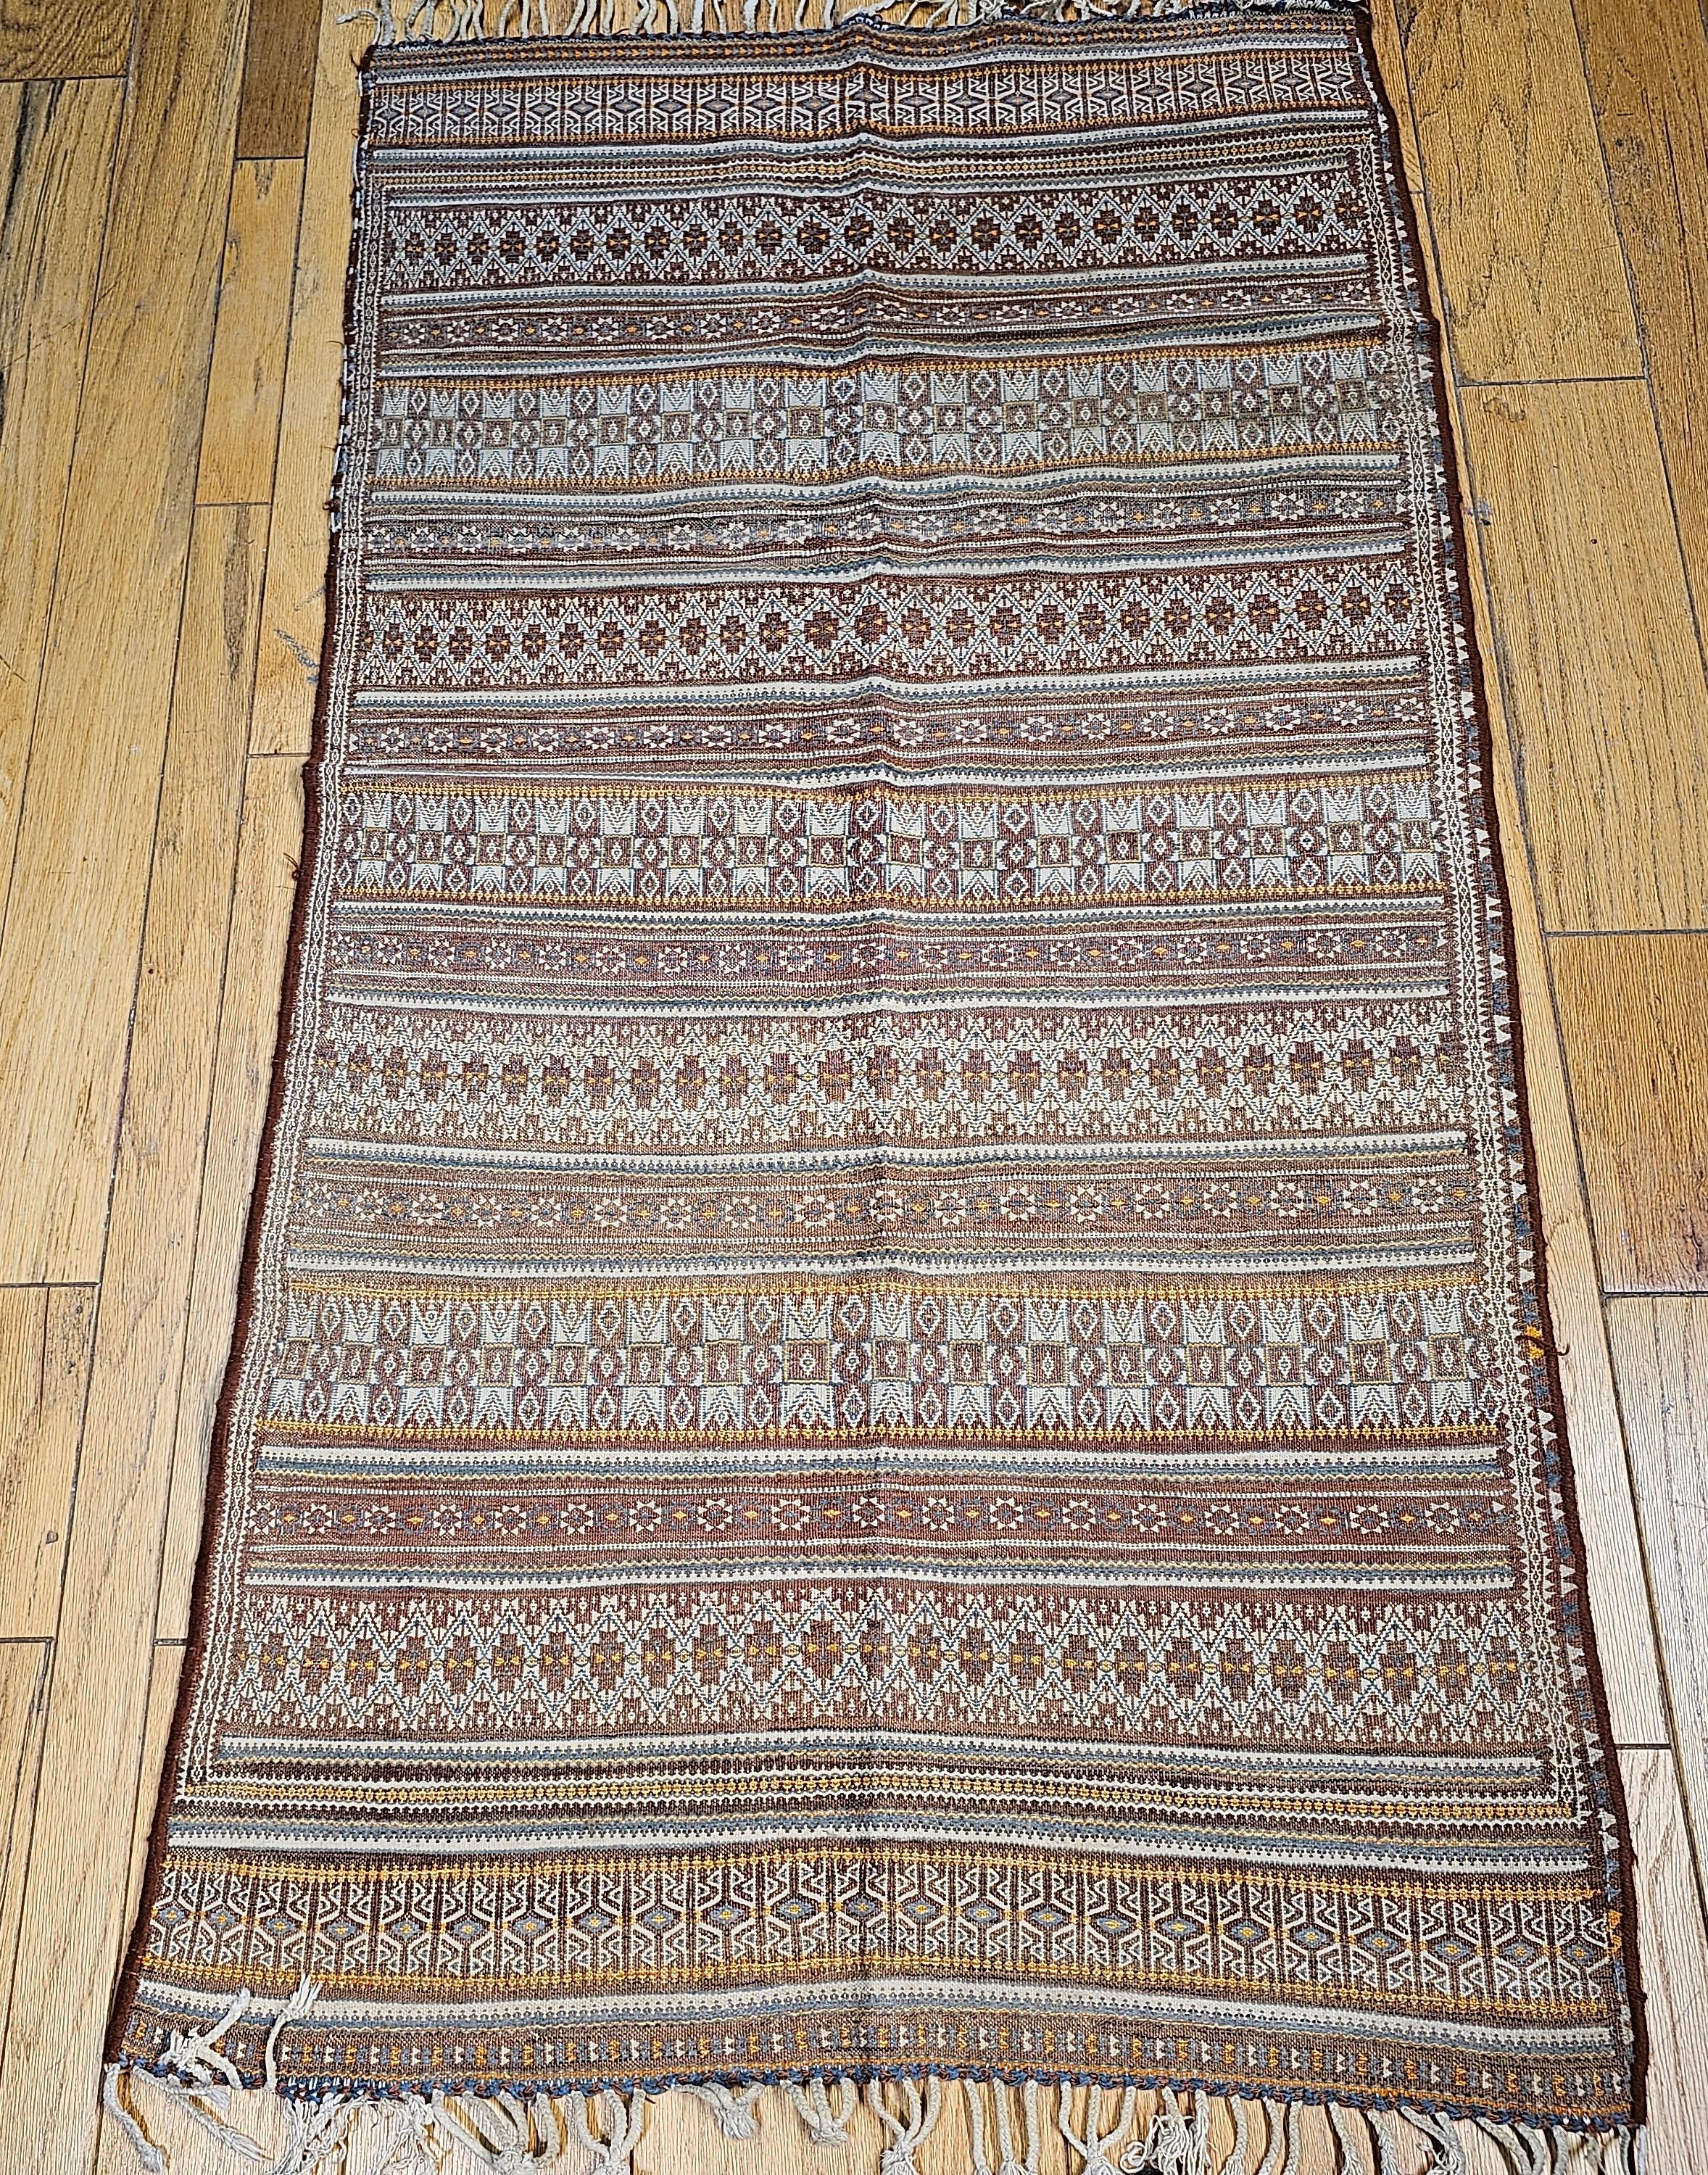 A beautiful Uzbek soumak kilim from Central Asia from the early 1900s.  The Uzbek Kilim is woven in the soumak method with rows of different designs in ivory, brown, green, and burgundy colors.  The Kilim is a great representation of the artistry